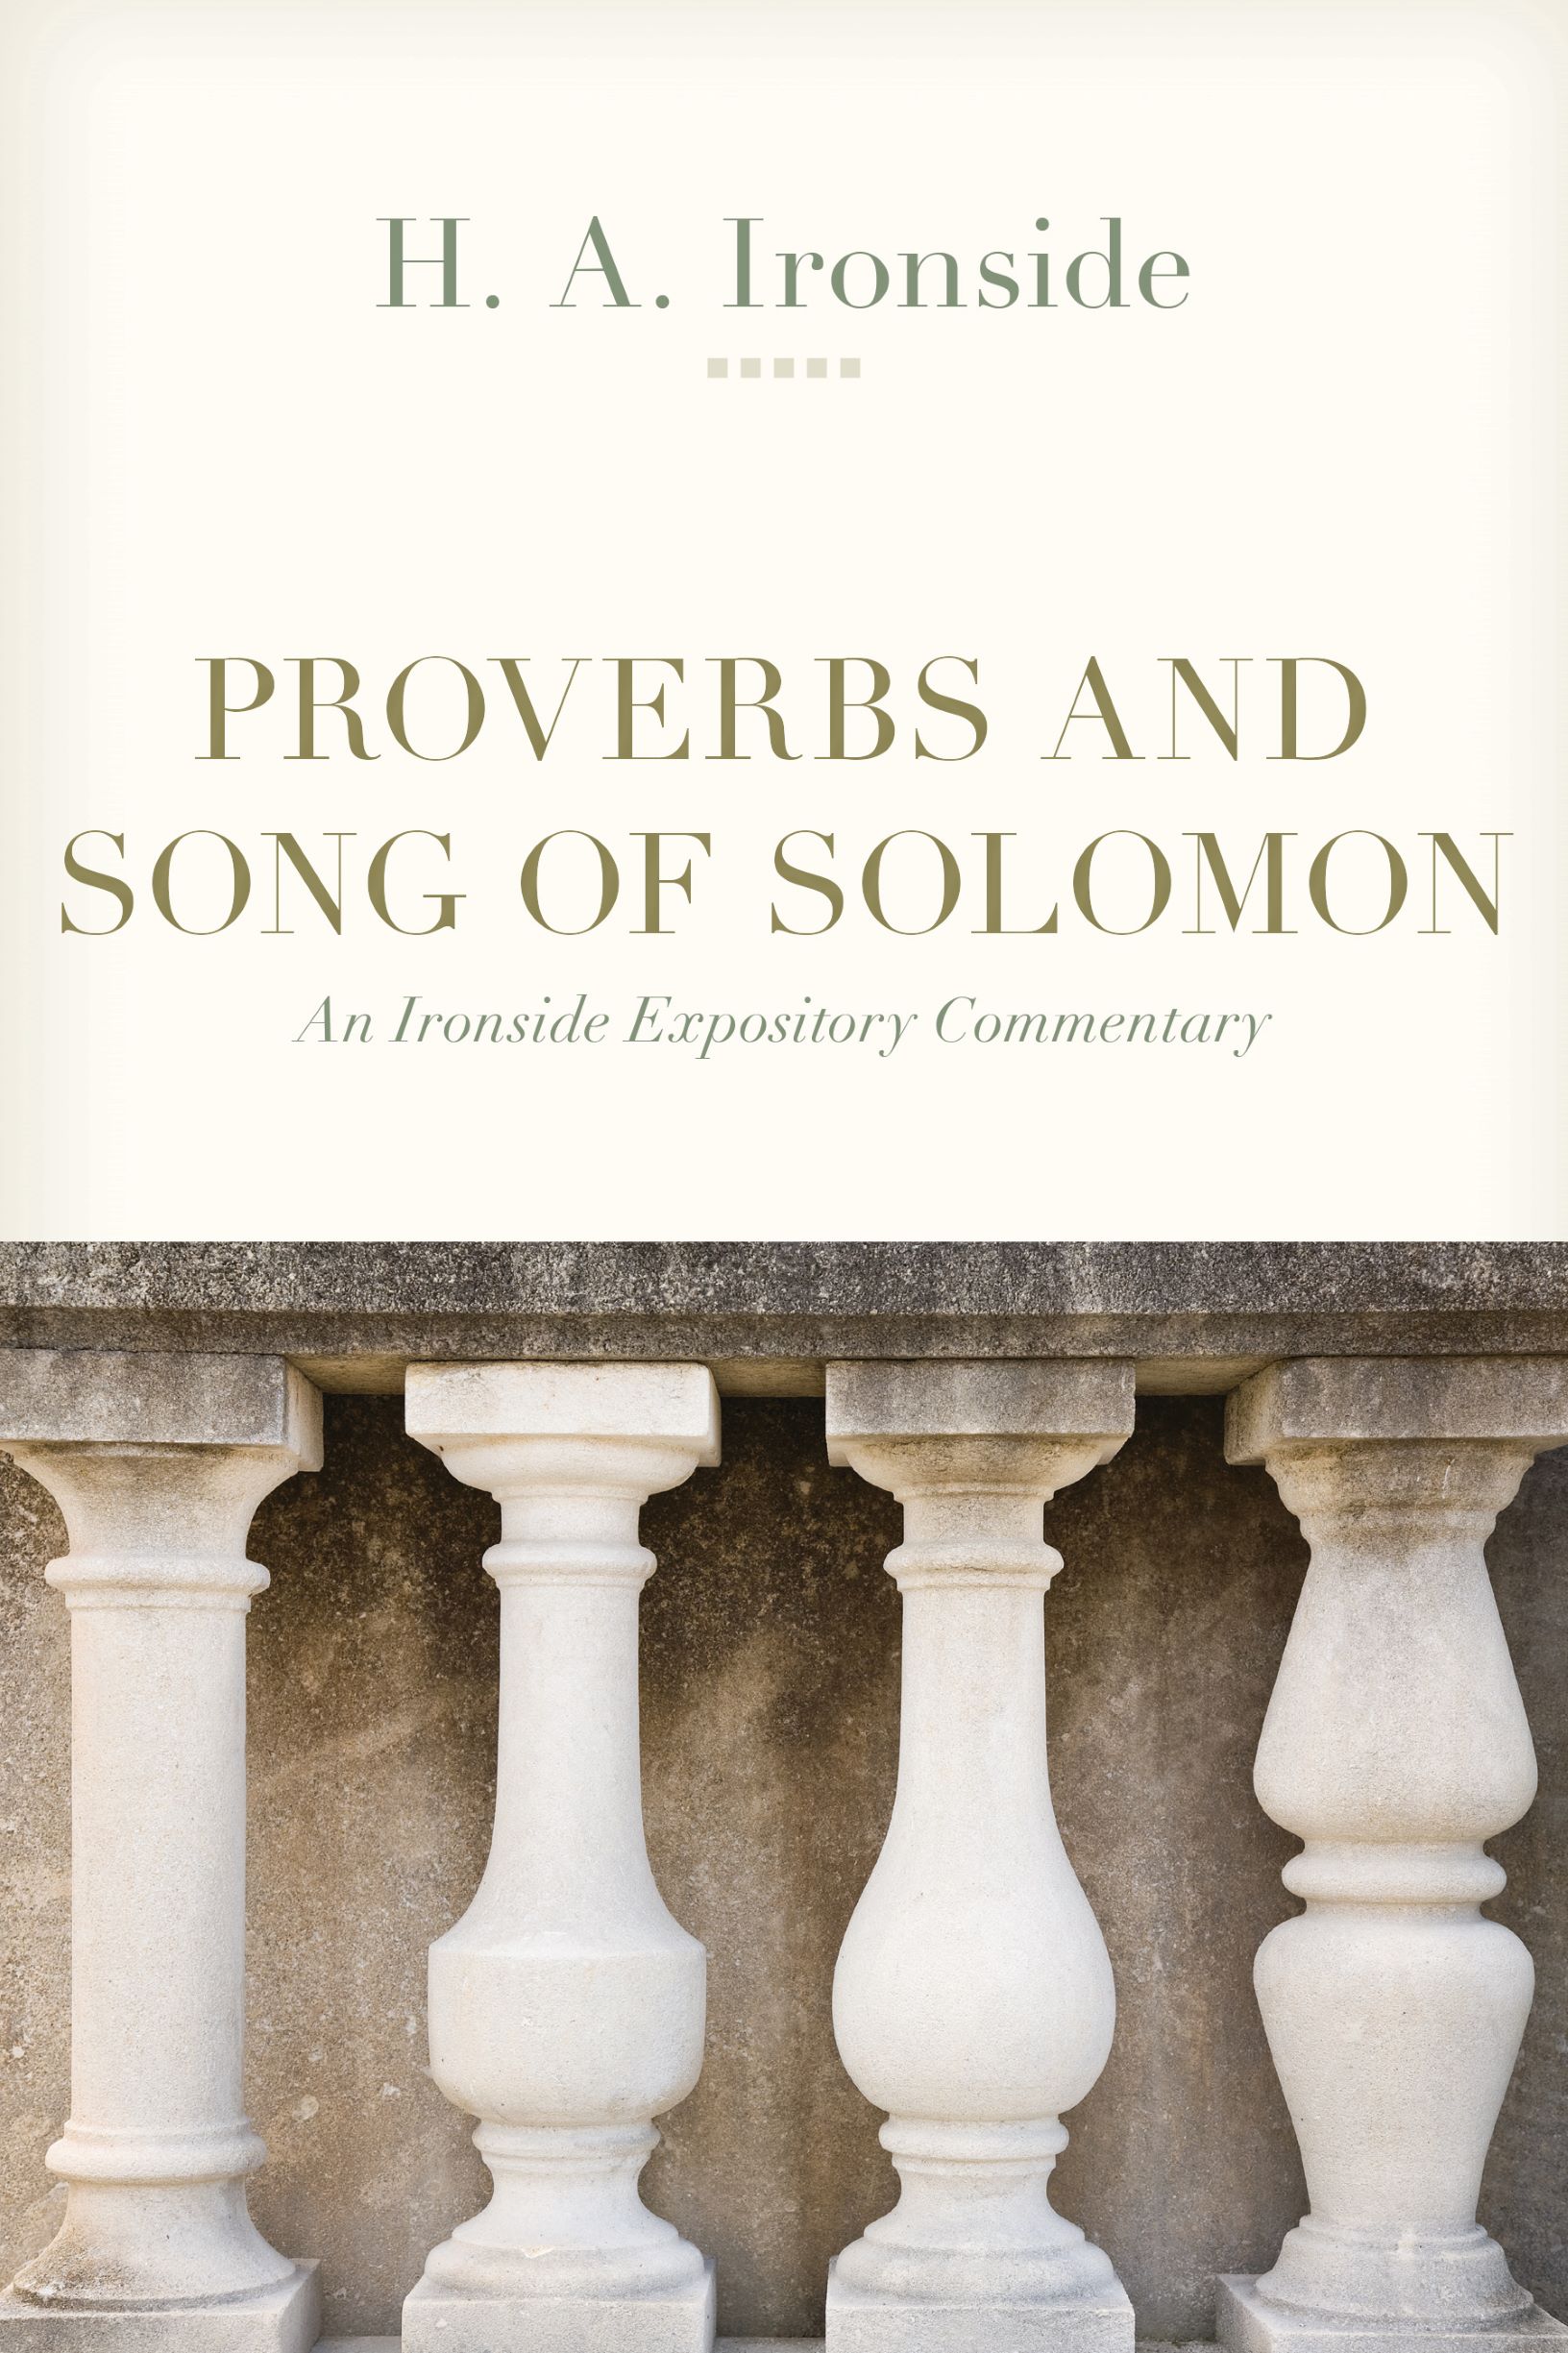 Proverbs and Song of Solomon